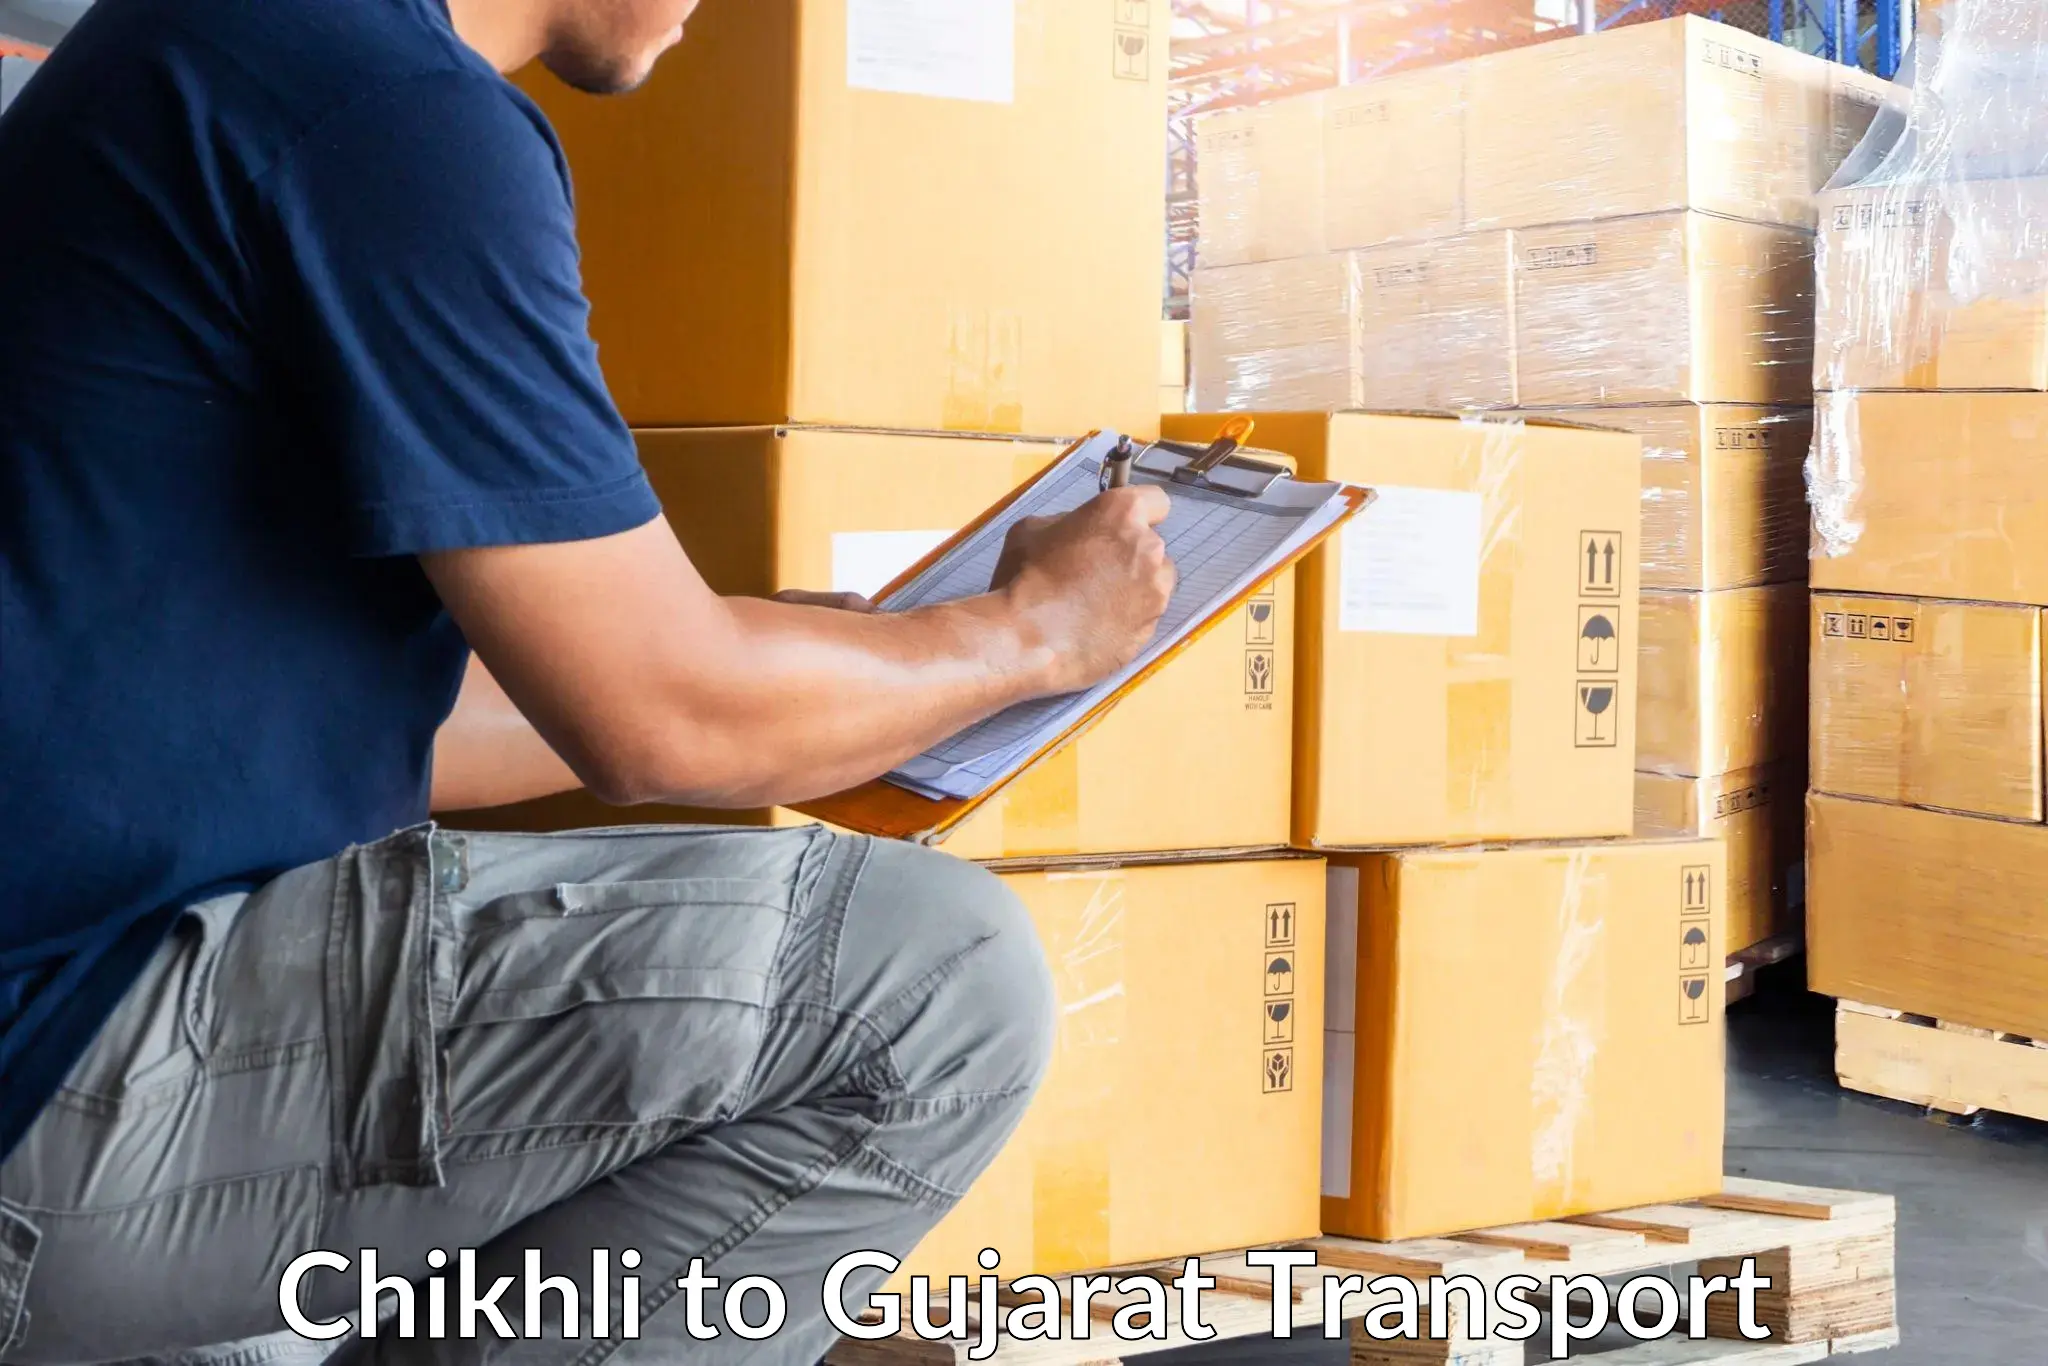 Air freight transport services Chikhli to Mehsana